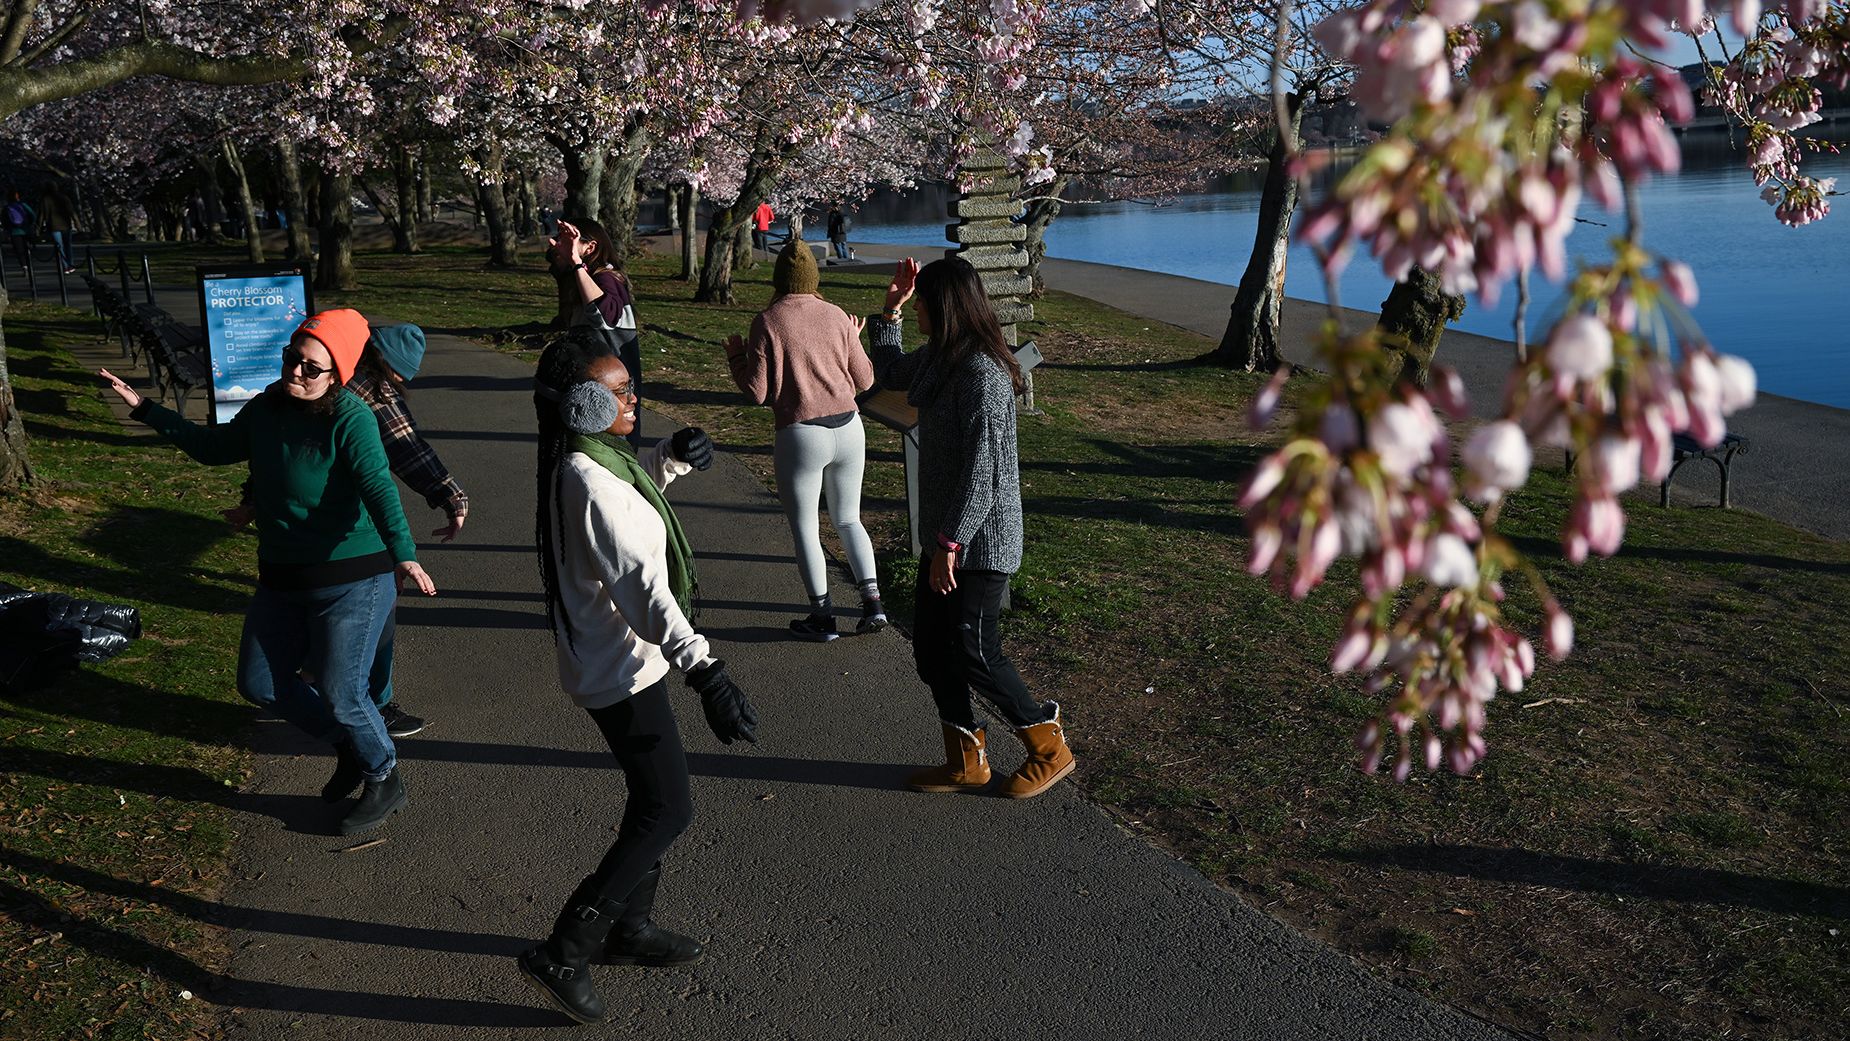 Surrounded by near-peak cherry blossoms, people dance to celebrate the first day of spring in 2023 at the Tidal Basin in Washington.